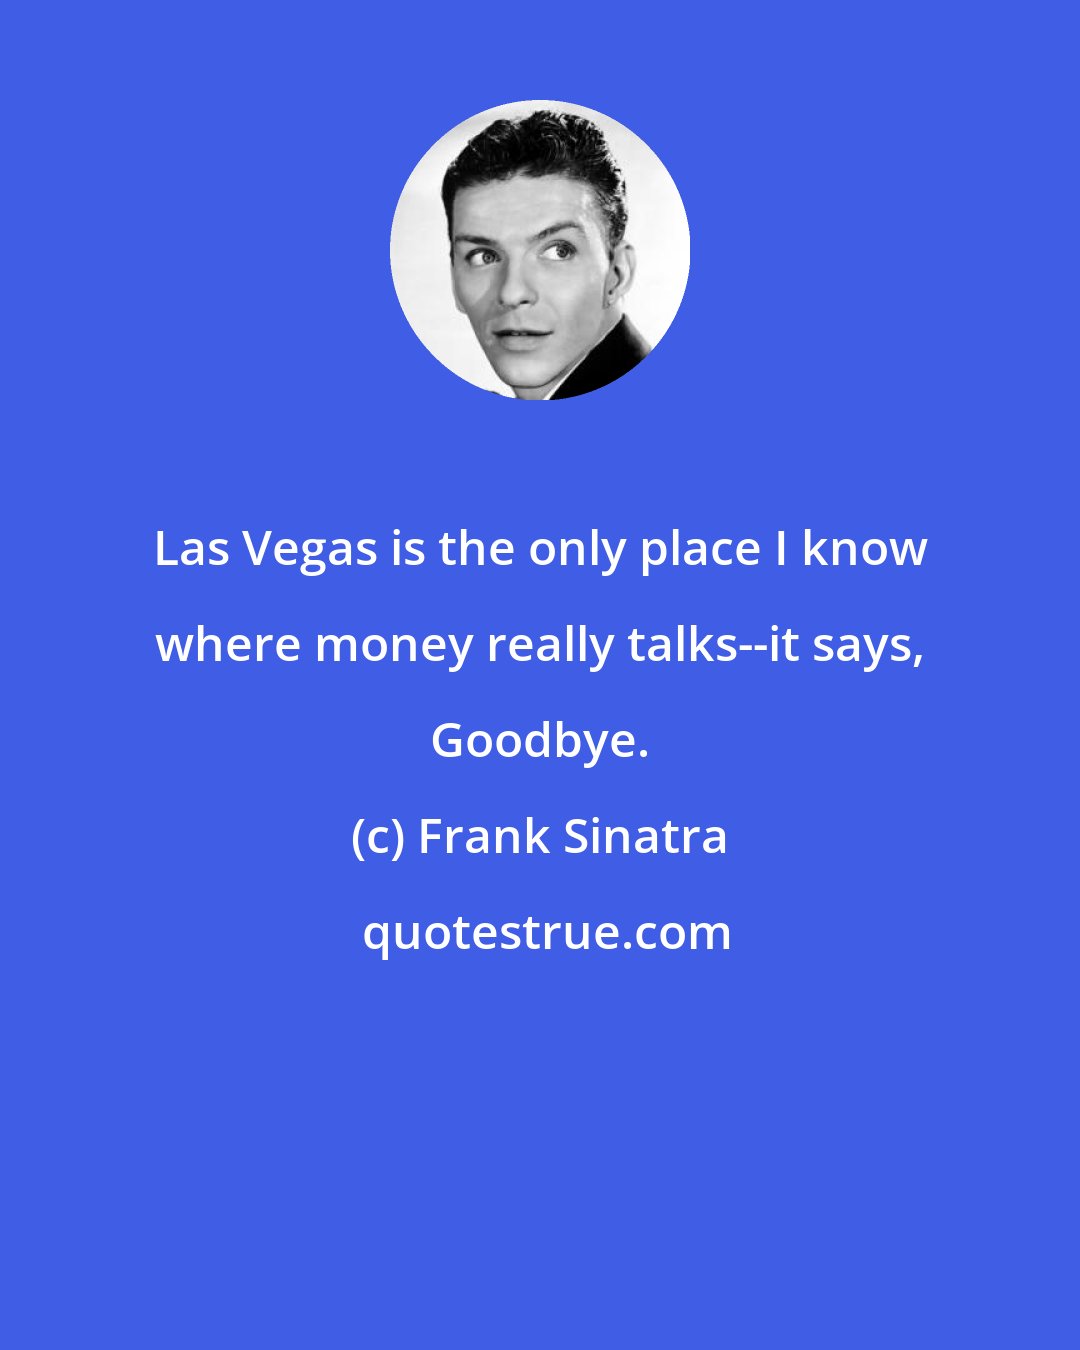 Frank Sinatra: Las Vegas is the only place I know where money really talks--it says, Goodbye.